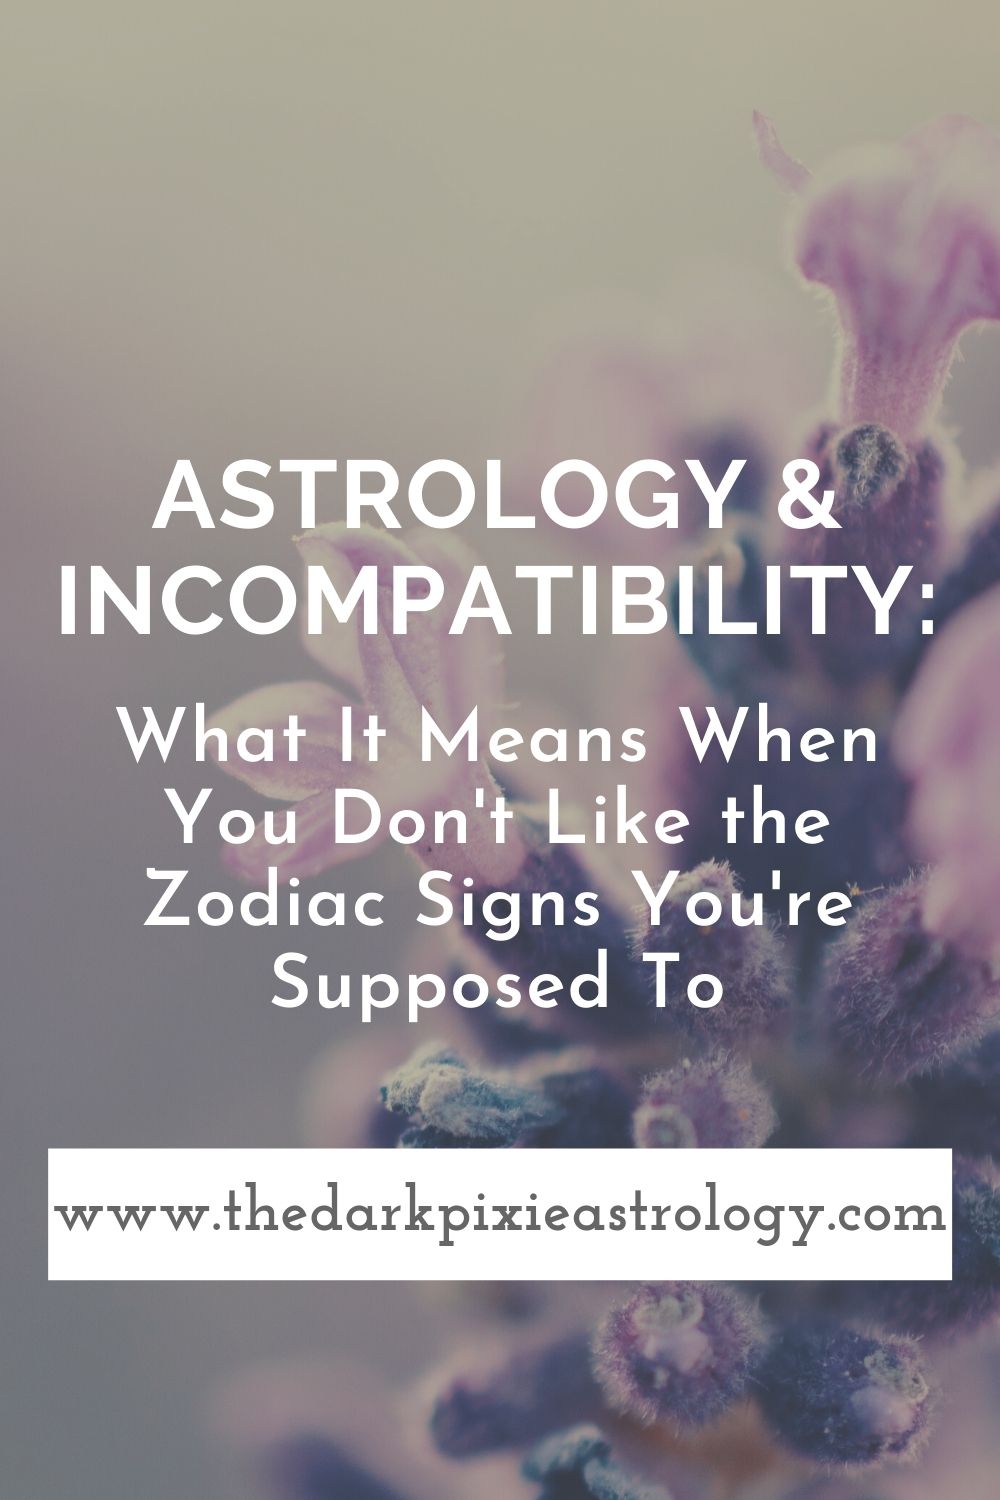 Astrology & Incompatibility: What It Means When You Don't Like the Zodiac Signs You're Supposed To - The Dark Pixie Astrology